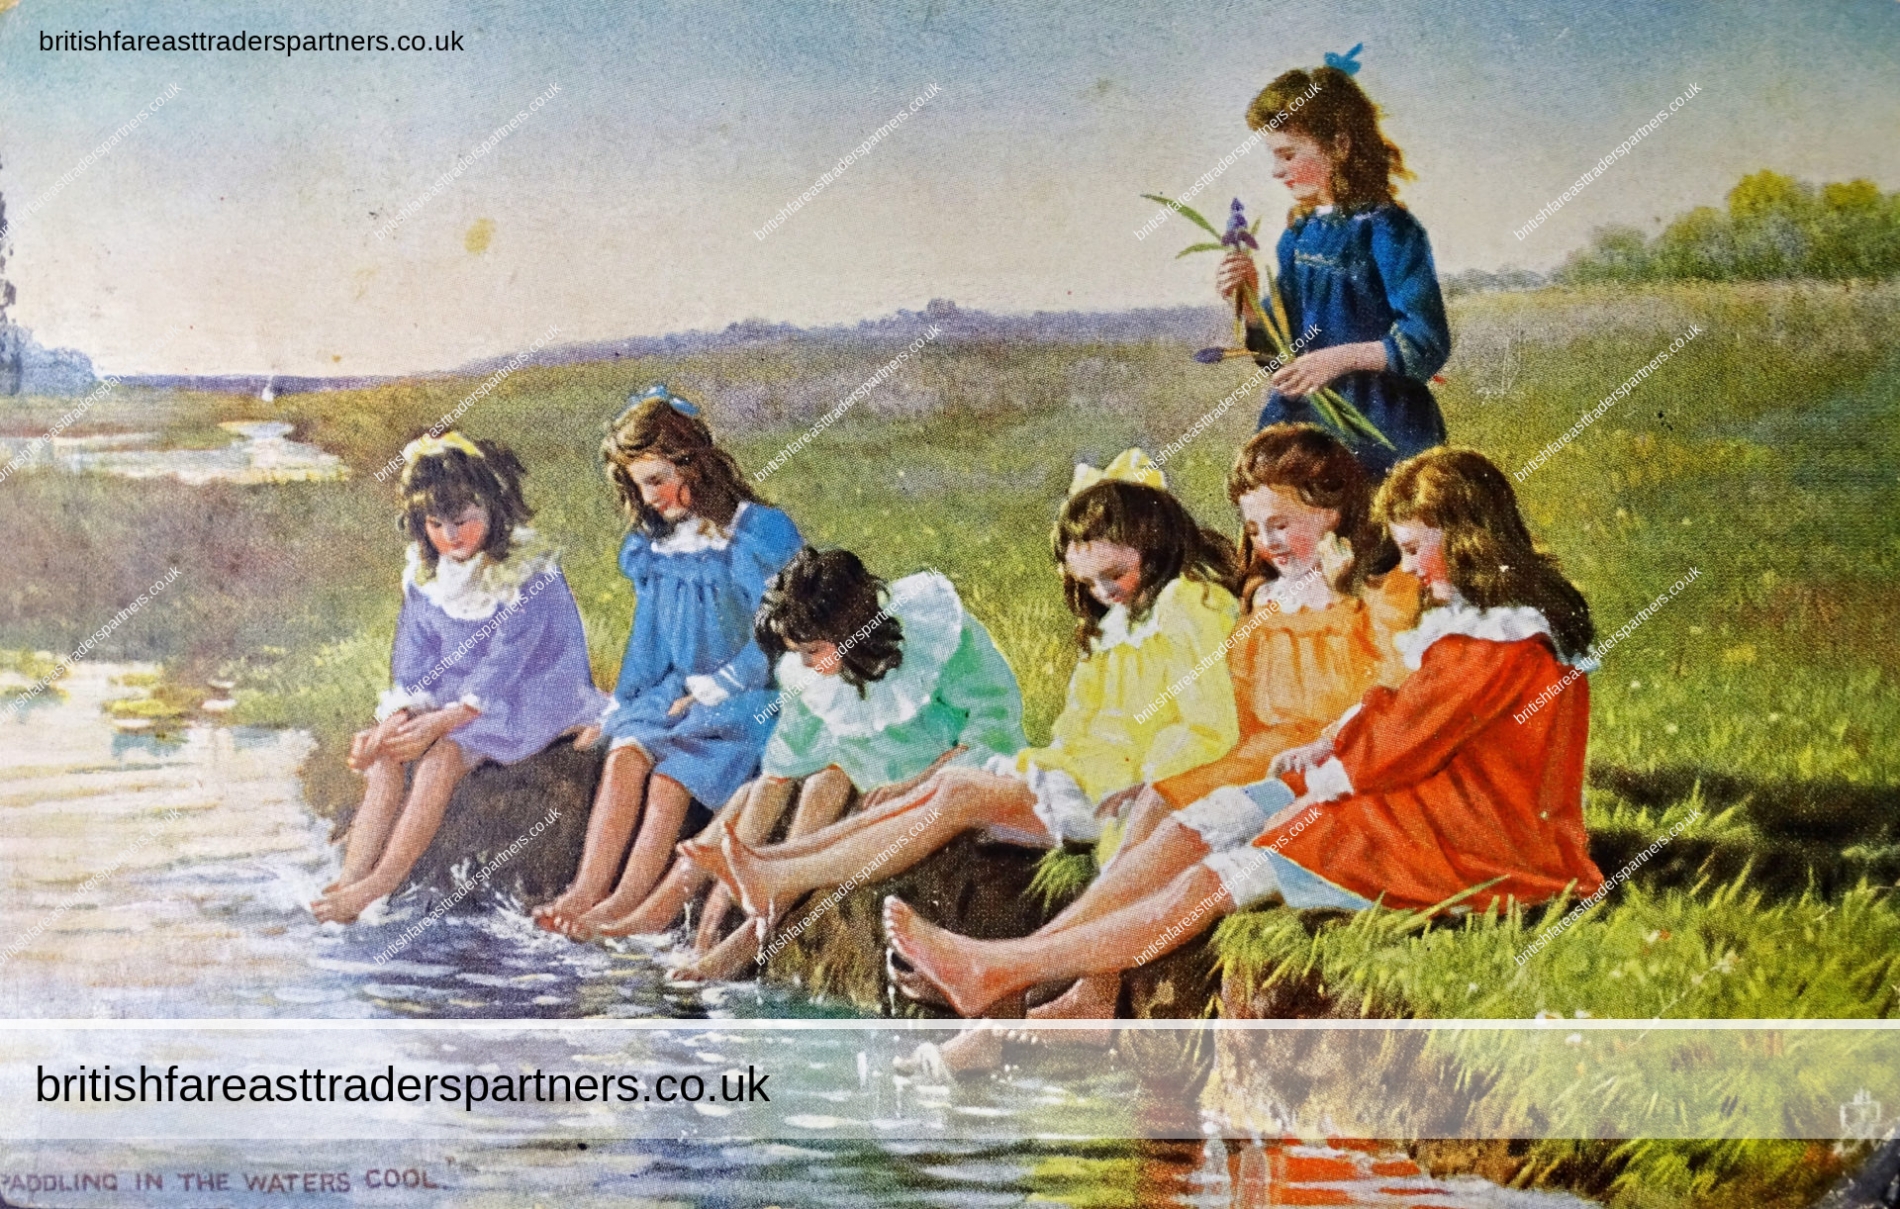 ANTIQUE 1906 POSTCARD RAPHAEL TUCK & SONS “PADDLING IN THE WATERS COOL” OILETTE FUN AND FROLIC NON-TOPOGRAPHICAL POSTCARD RAPHAEL TUCK & SONS |  RURAL LIFE | YOUNG GIRLS | SUMMERTIME |  COUNTRYSIDE | RIVERS & STREAMS | BRITISH | HERITAGE | CULTURE | LIFESTYLE